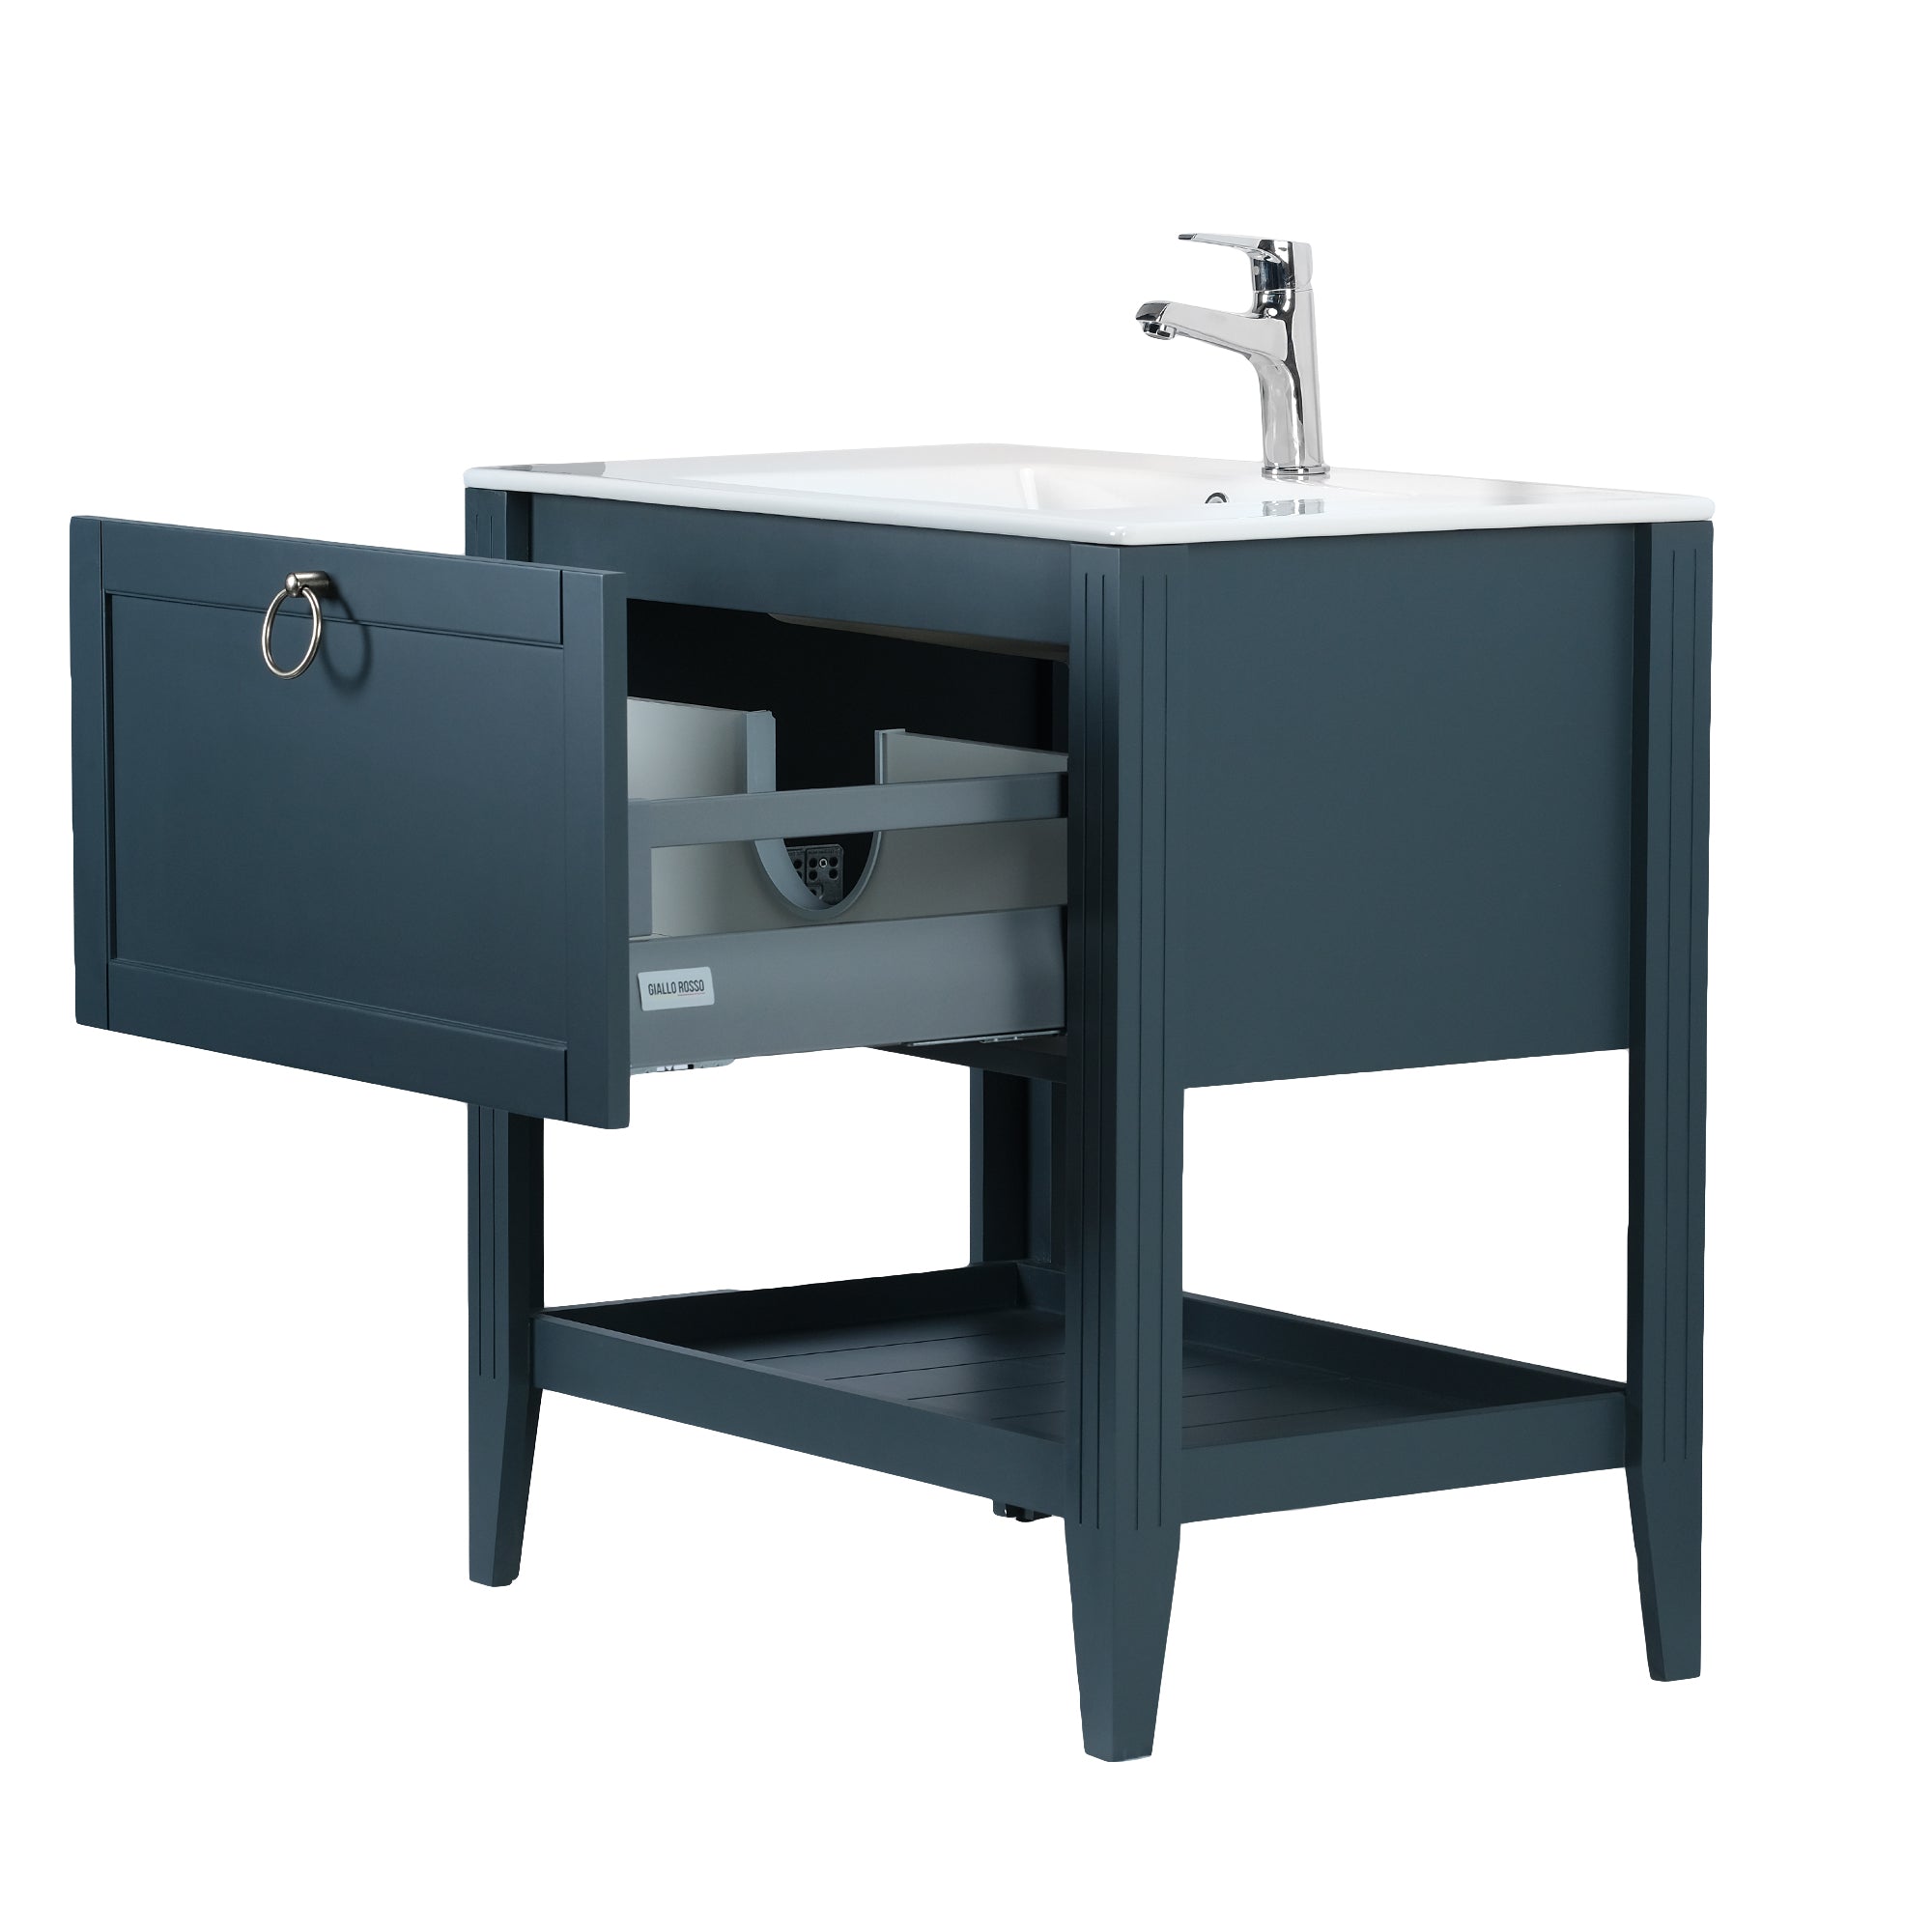 SOFIA 32INCH FREE STANDING VANITY AND SINK COMBO - CHARCOAL GRAY